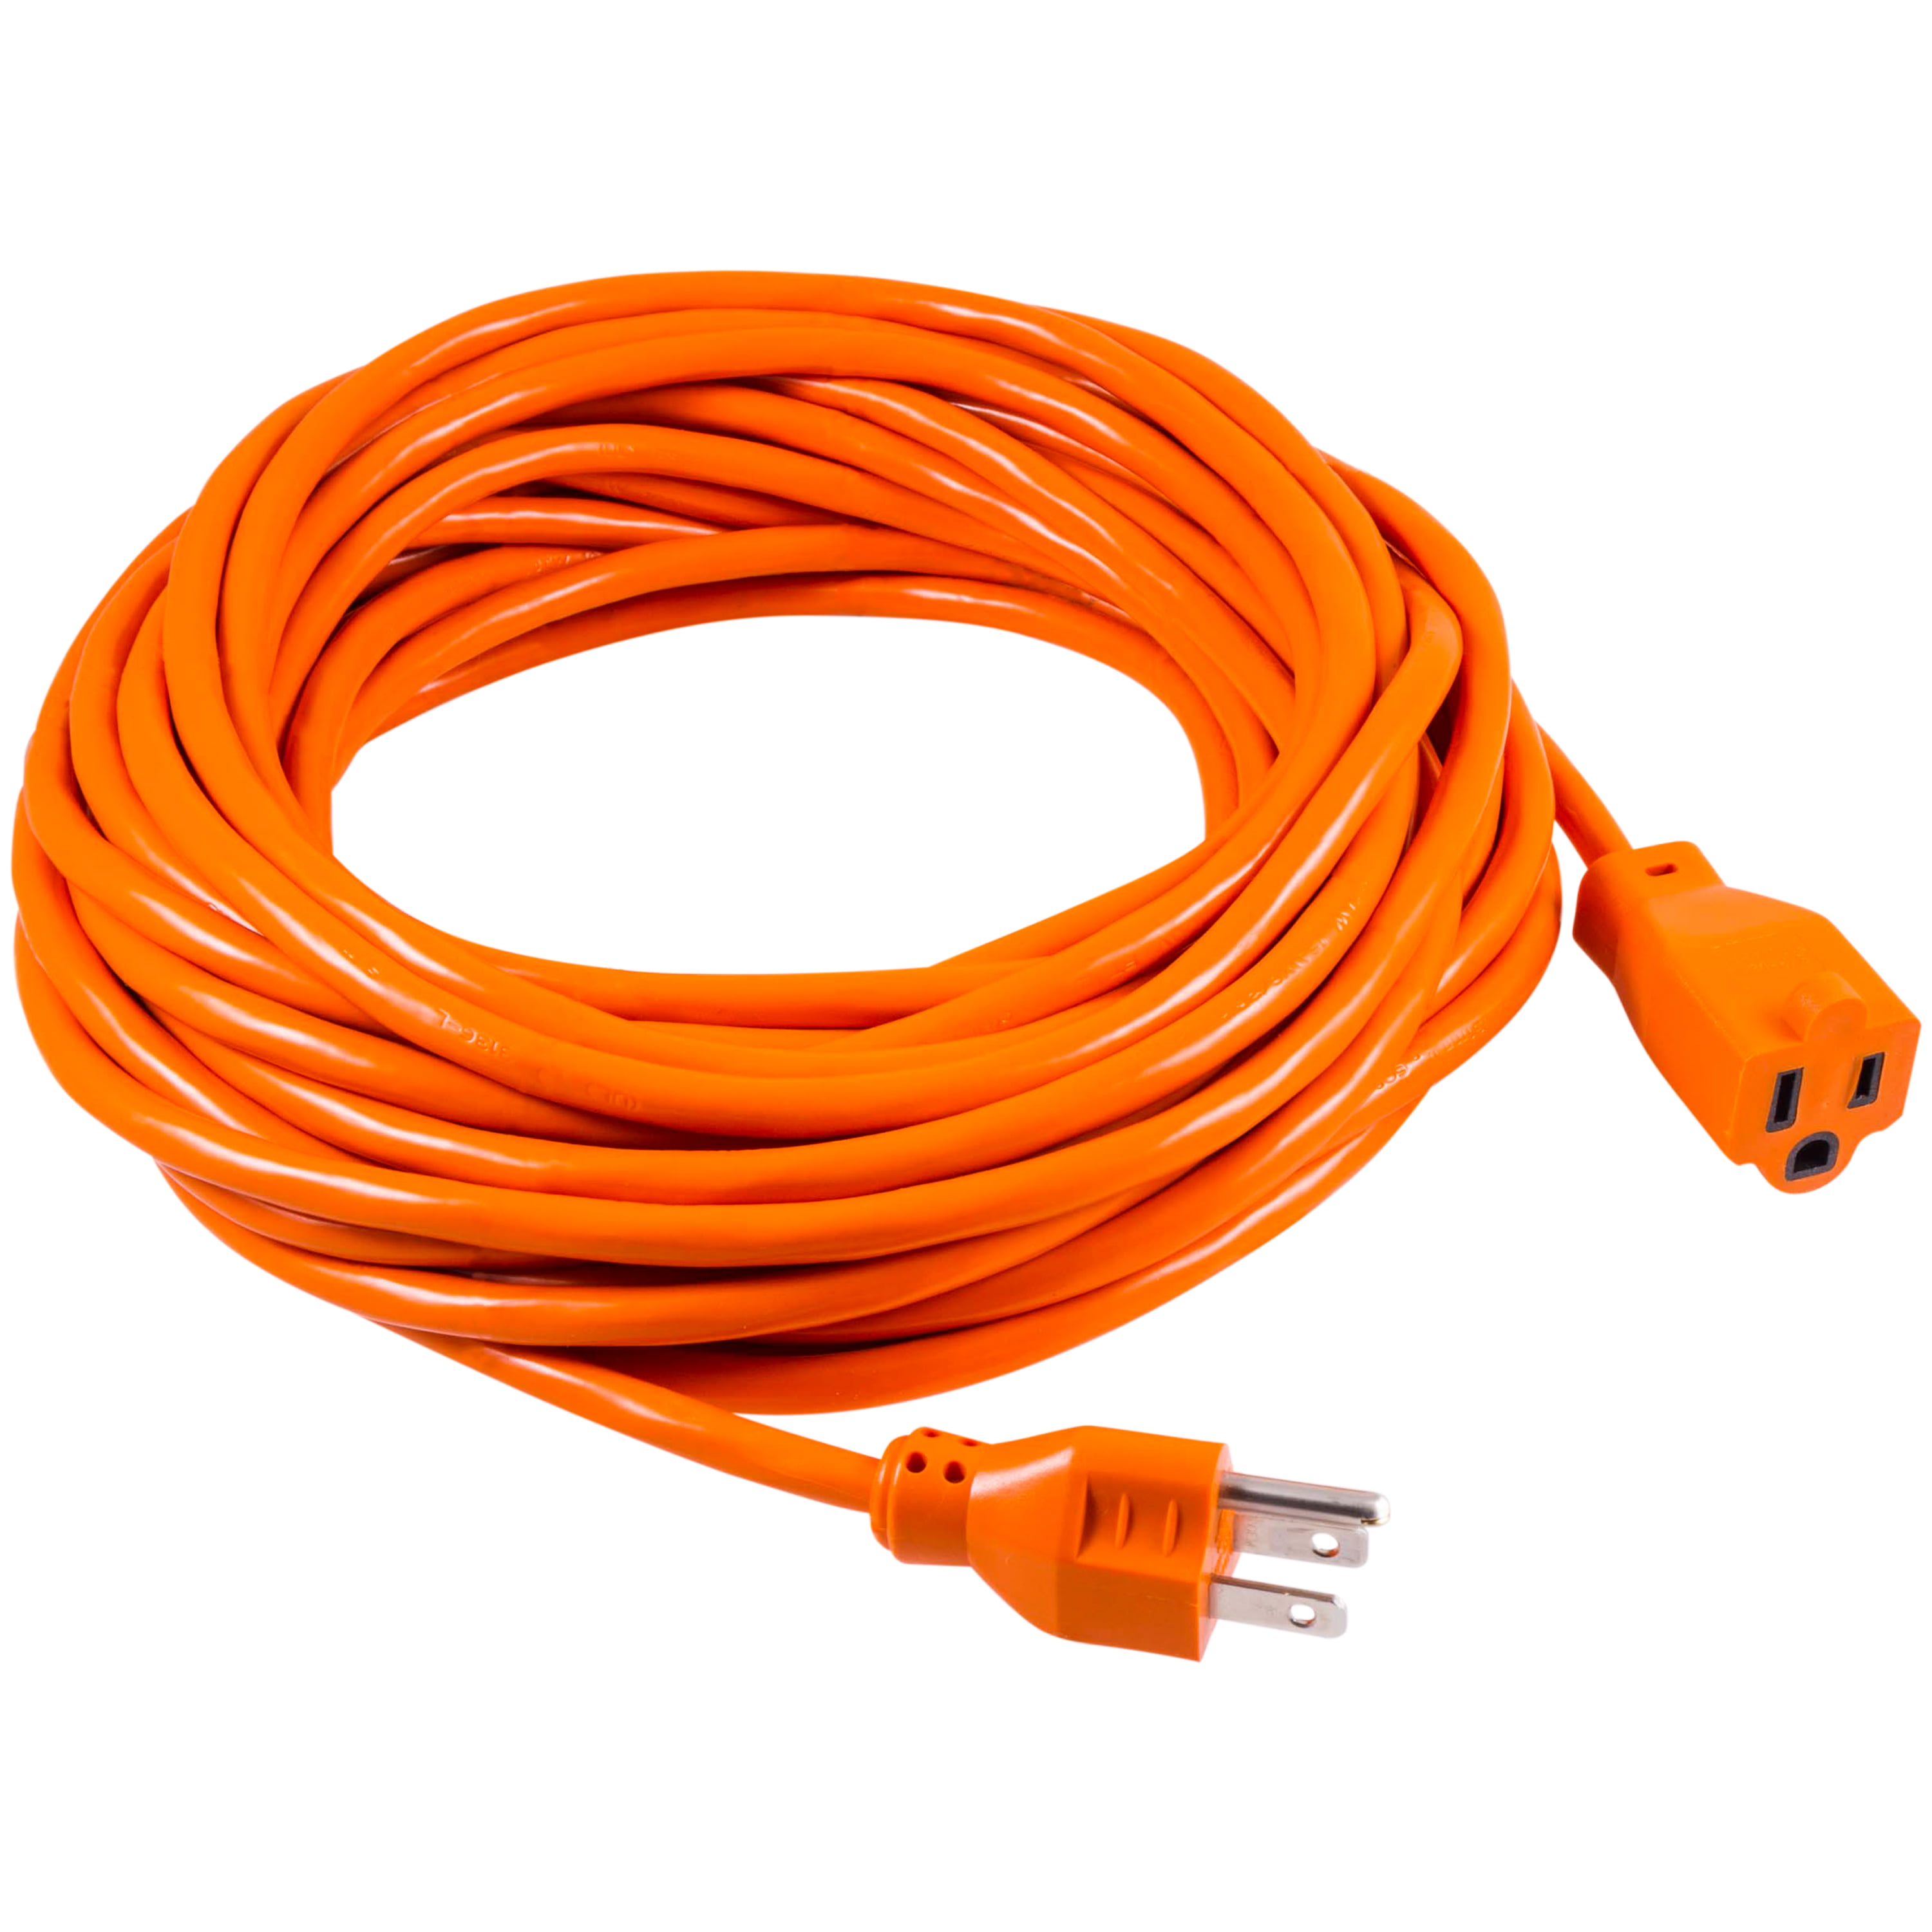 Wiring An Extension Cord